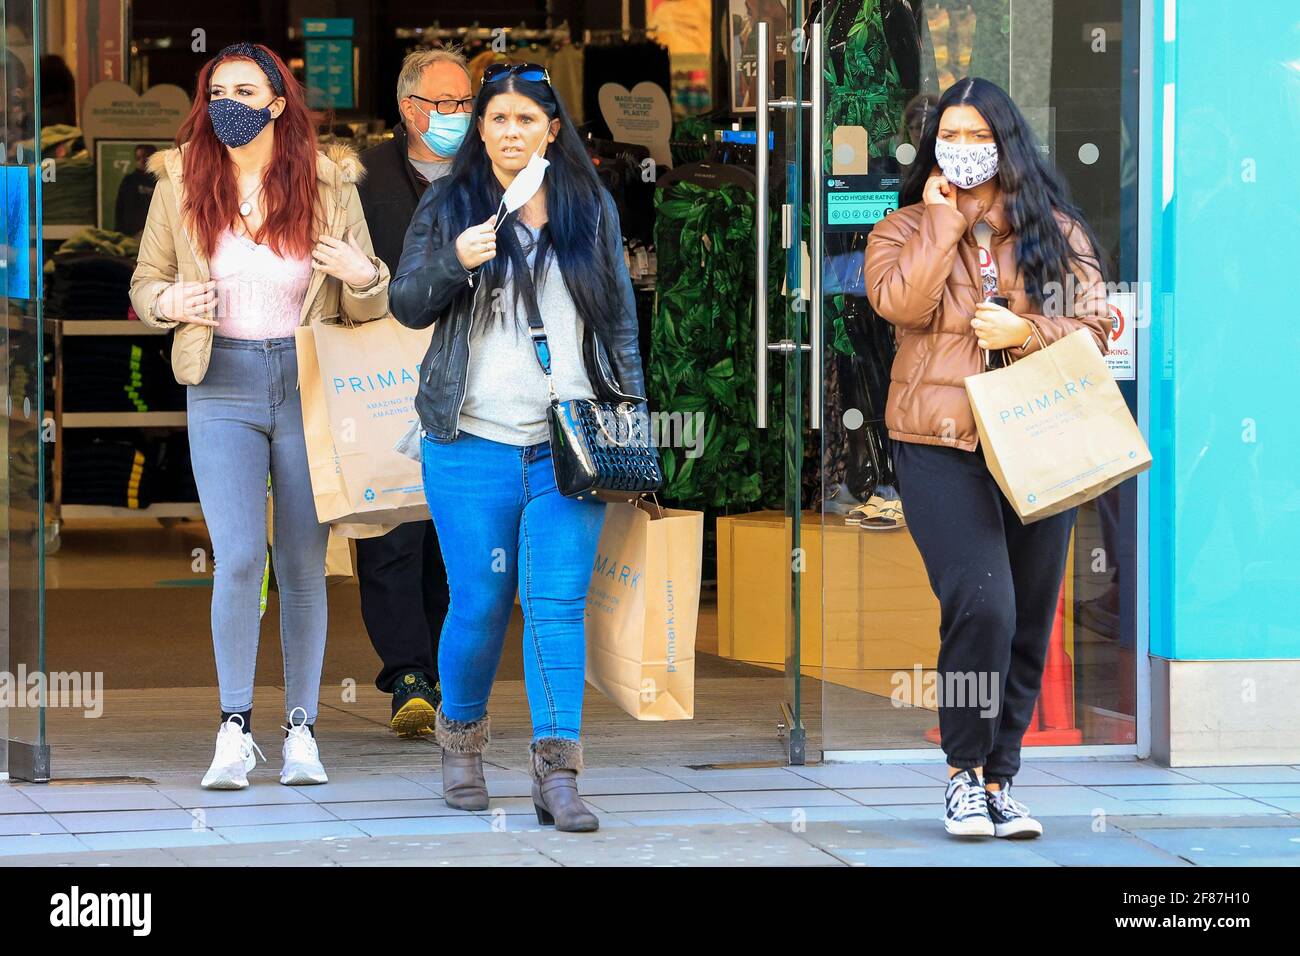 Newcastle Upon Tyne, UK. 12th Apr, 2021. Shoppers leave Primark in Northumberland Street, Newcastle upon Tyne, as retail premises are allowed to reopen to the public as national lockdown restrictions are eased in Newcastle upon Tyne, England on 4/12/2021. (Photo by Iam Burn/News Images/Sipa USA) Credit: Sipa USA/Alamy Live News Stock Photo